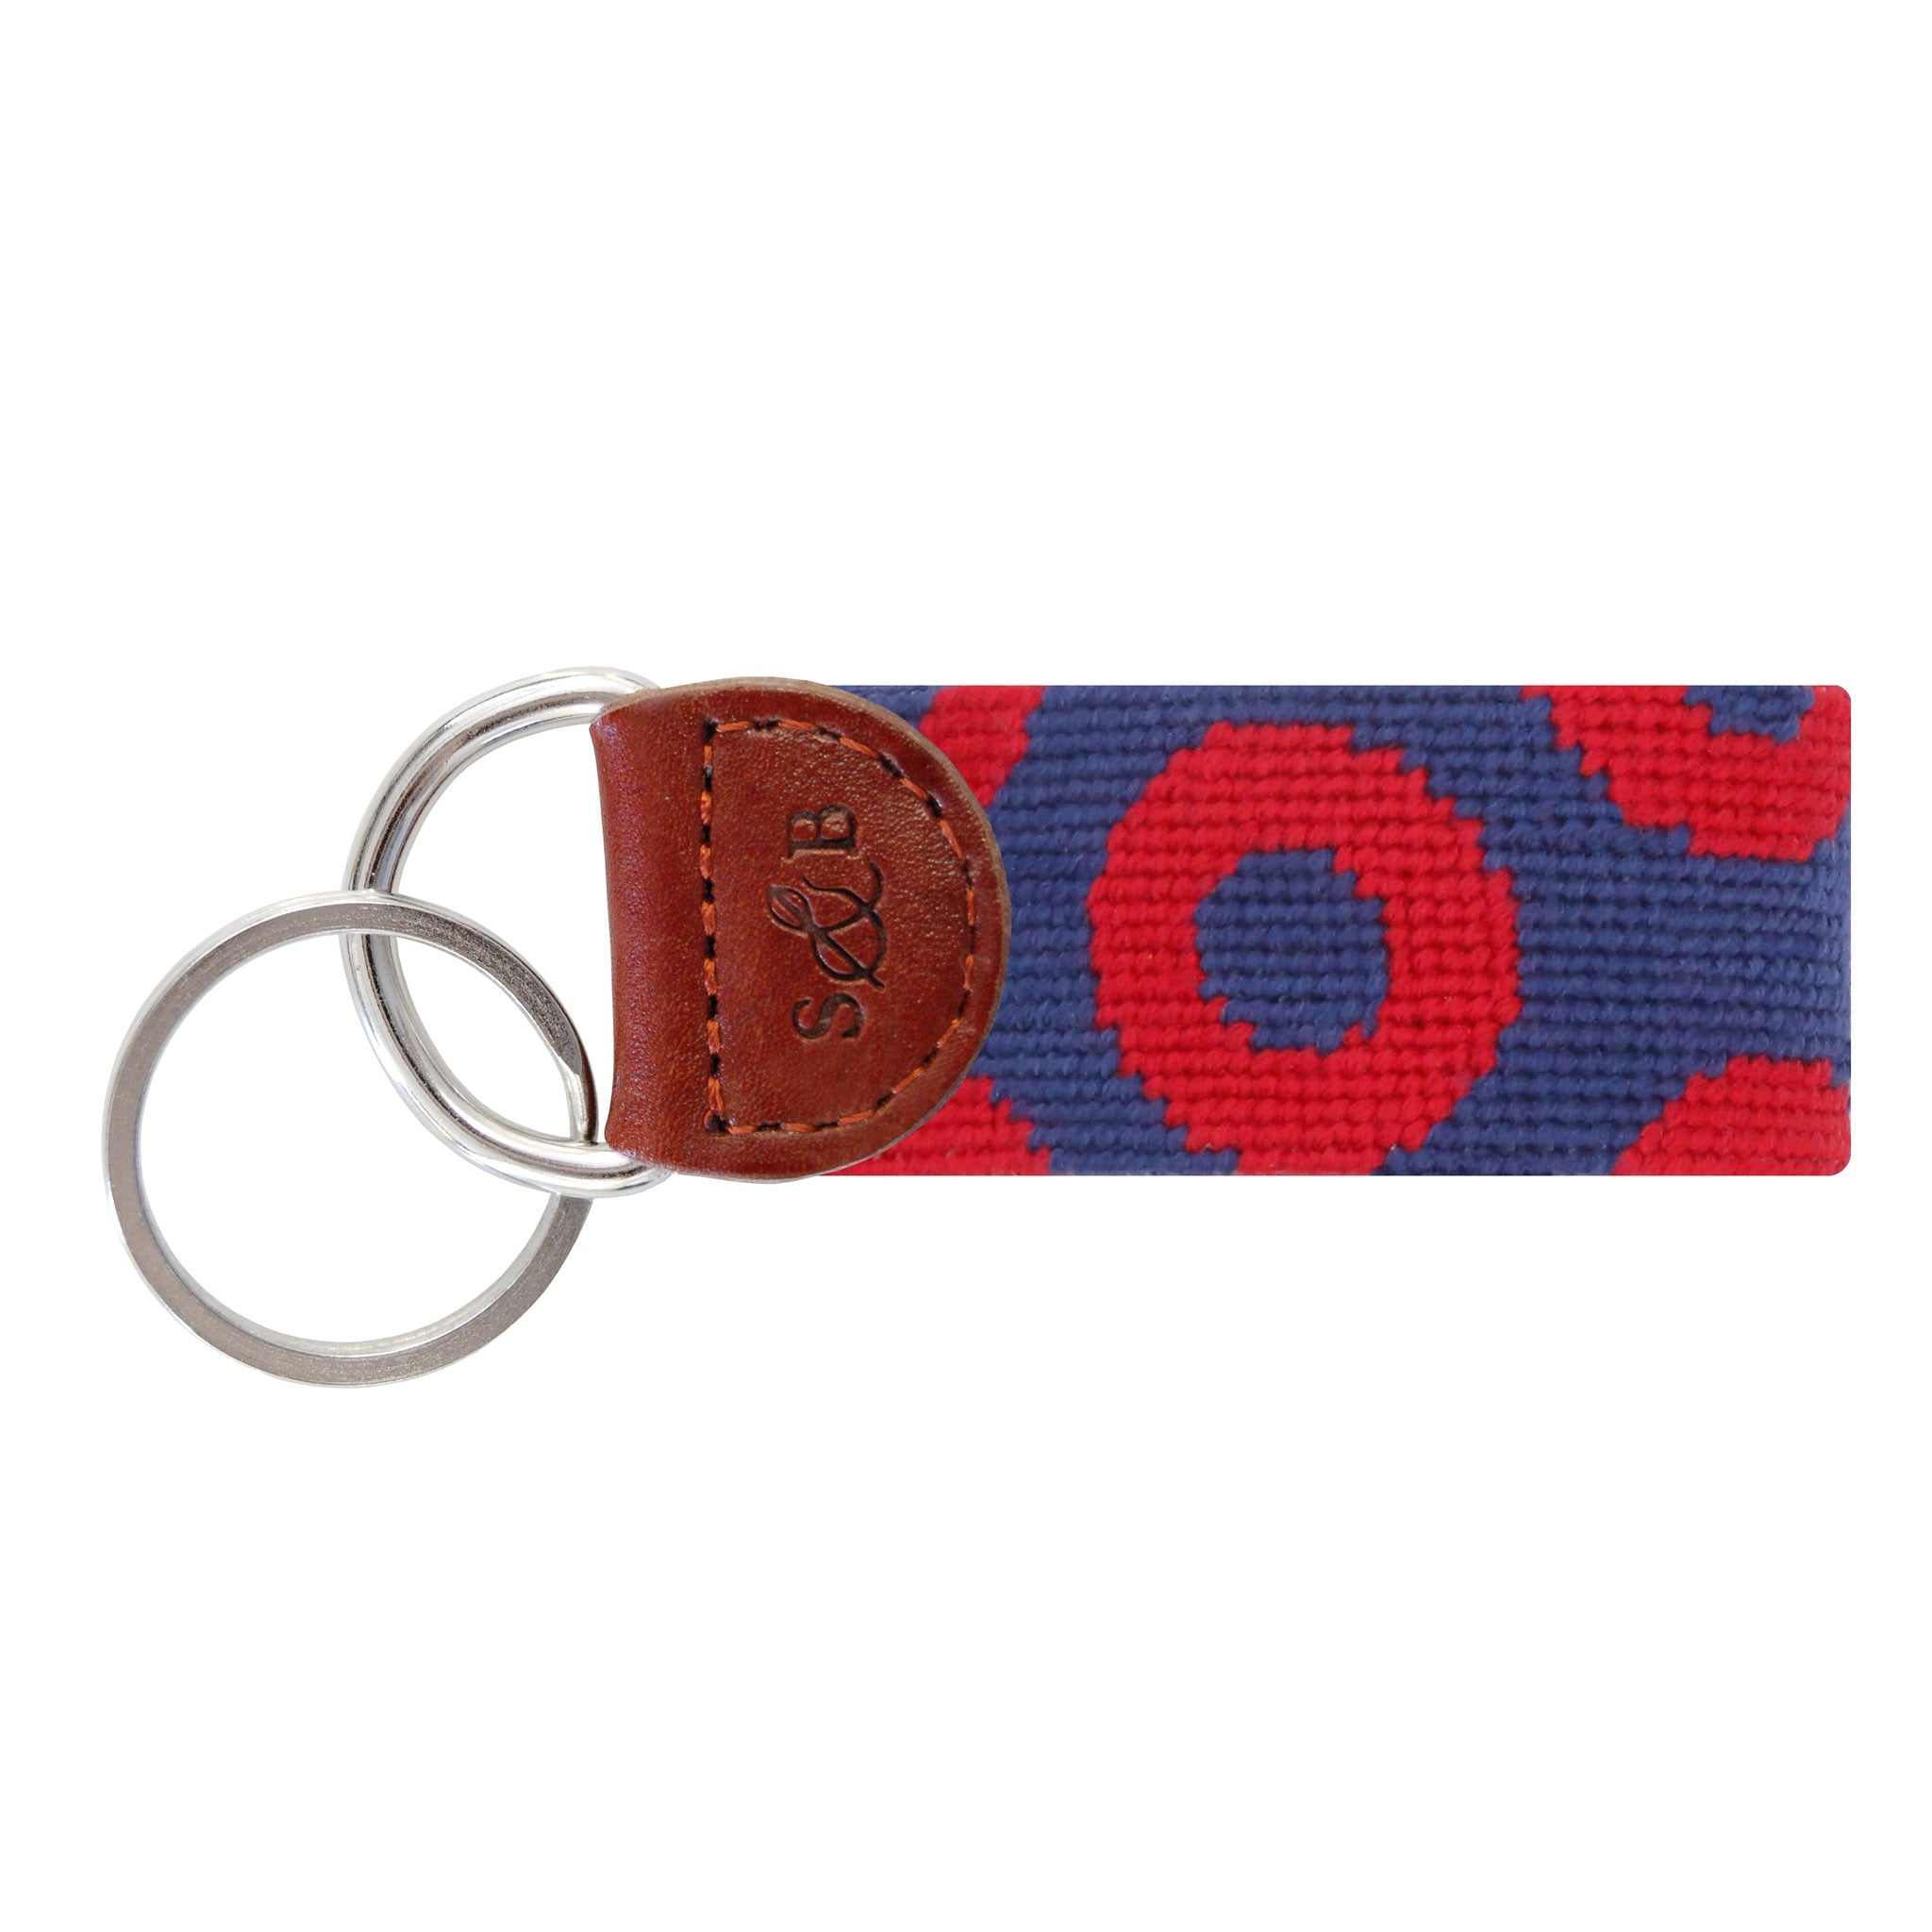 Smathers and Branson The Donut Pattern Needlepoint Key Fob Classic Navy - Red Donuts  